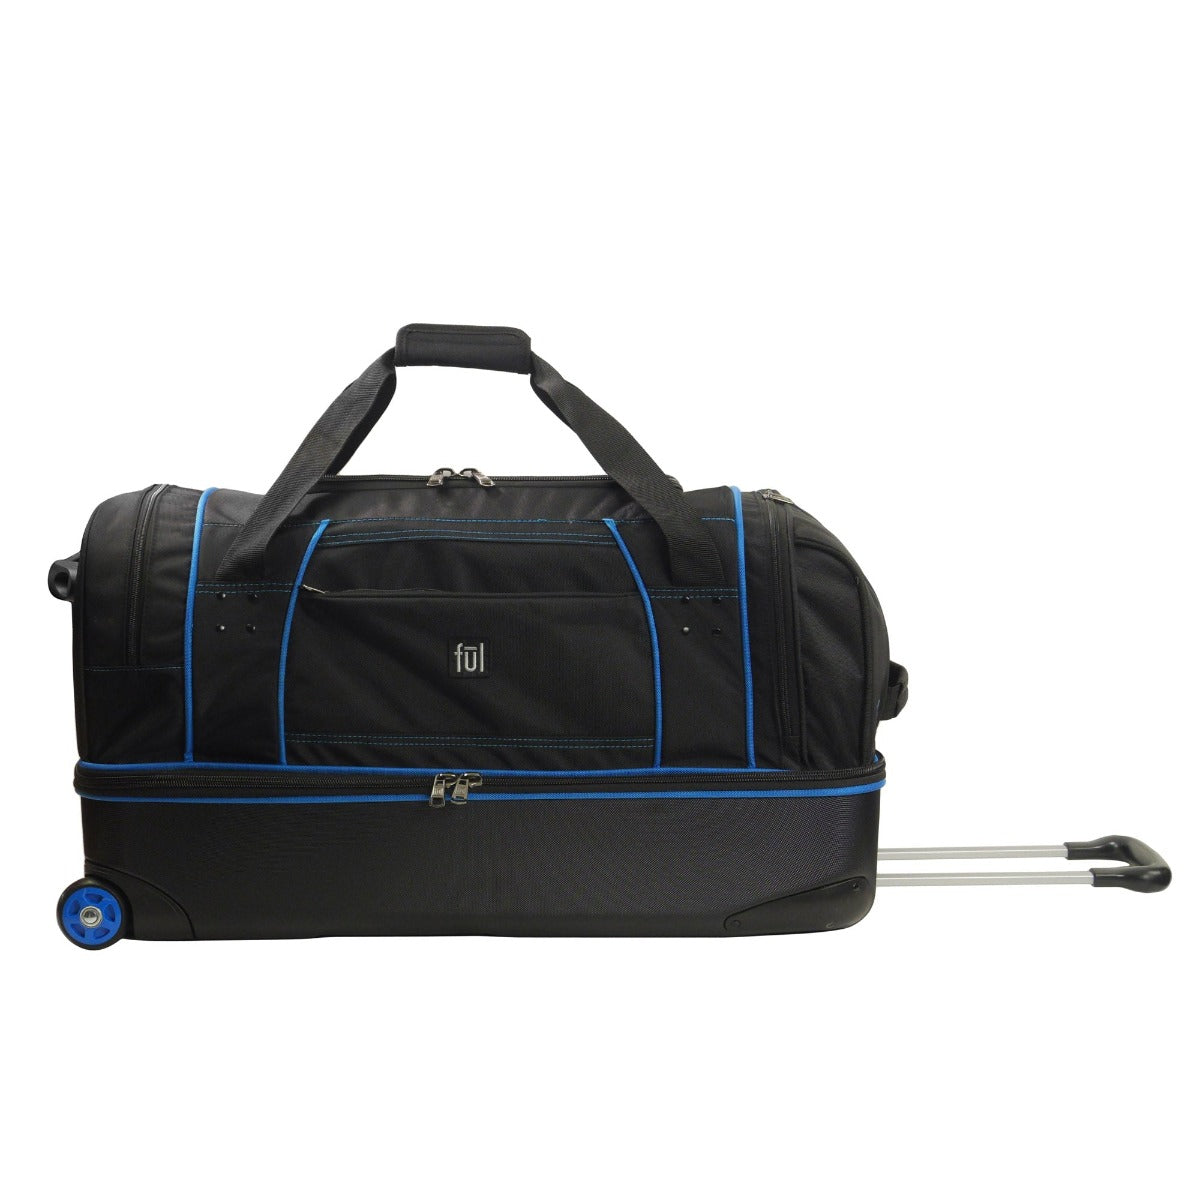 Black with blue wheels Ful Workhorse 30 inch extra-large split level wheeled rolling duffle bag